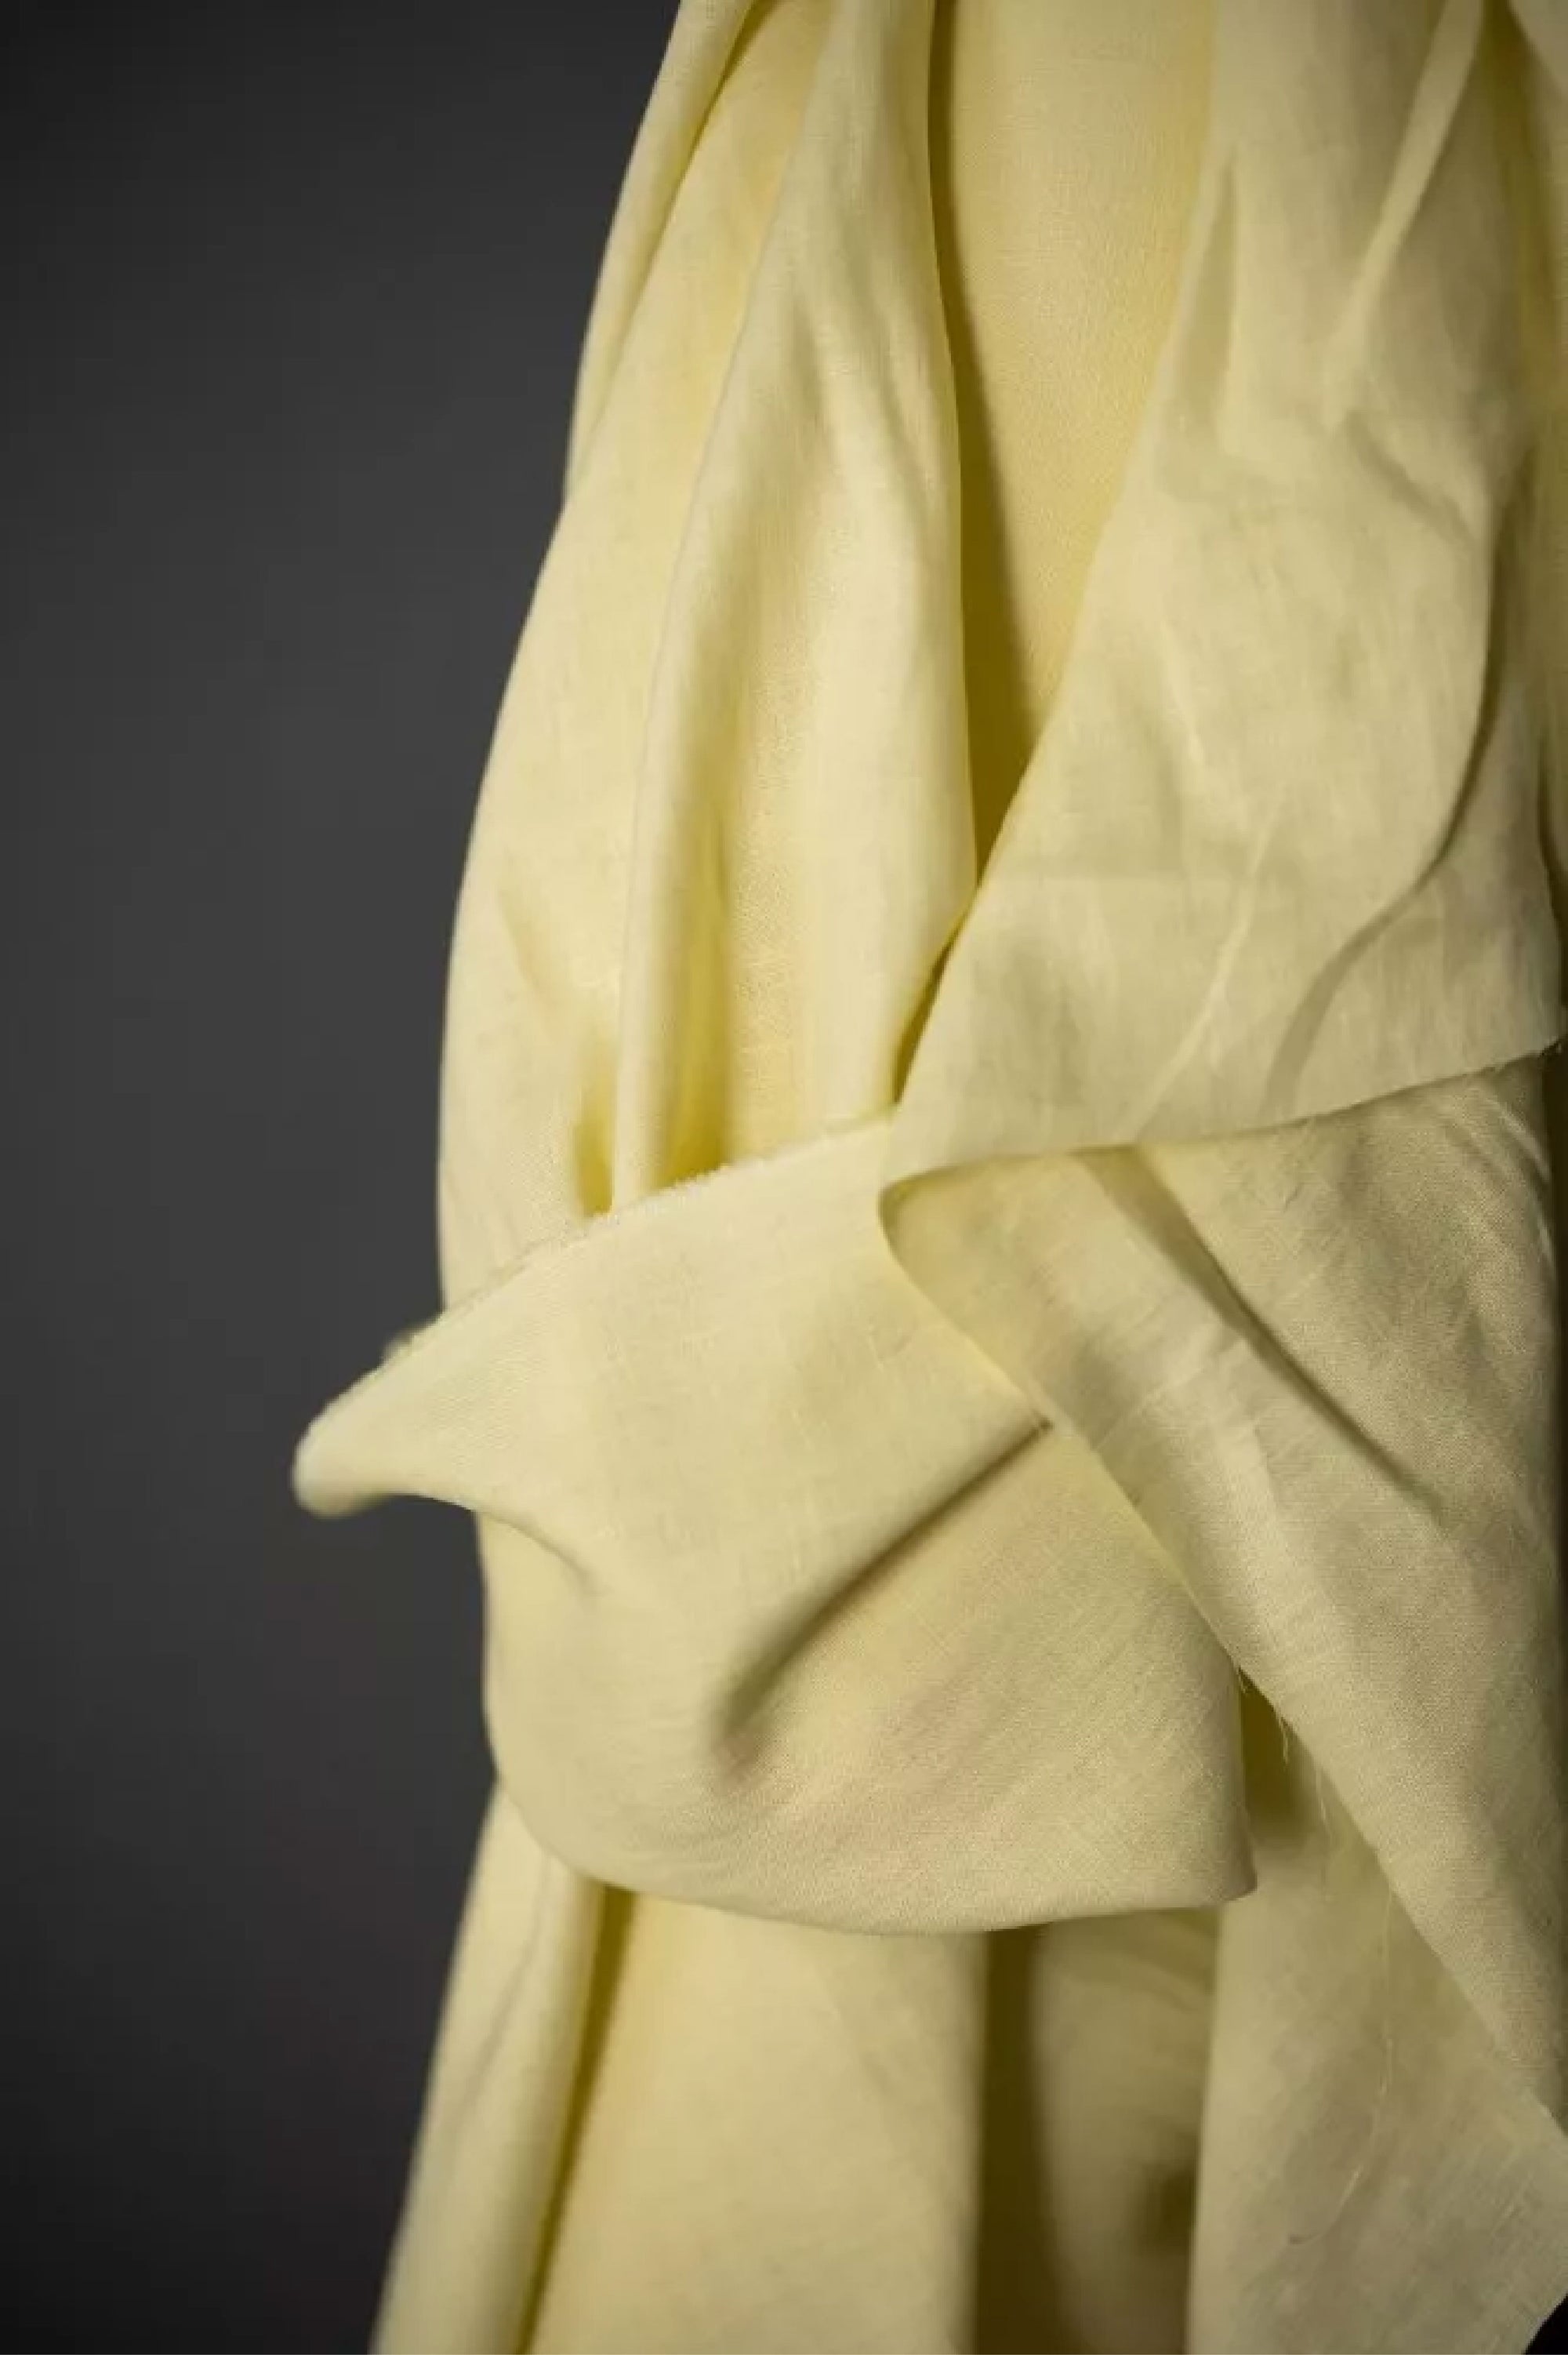 roll of  European laundered linen, tumbled at the mill for softness. Very pale yellow on a dark grey background.